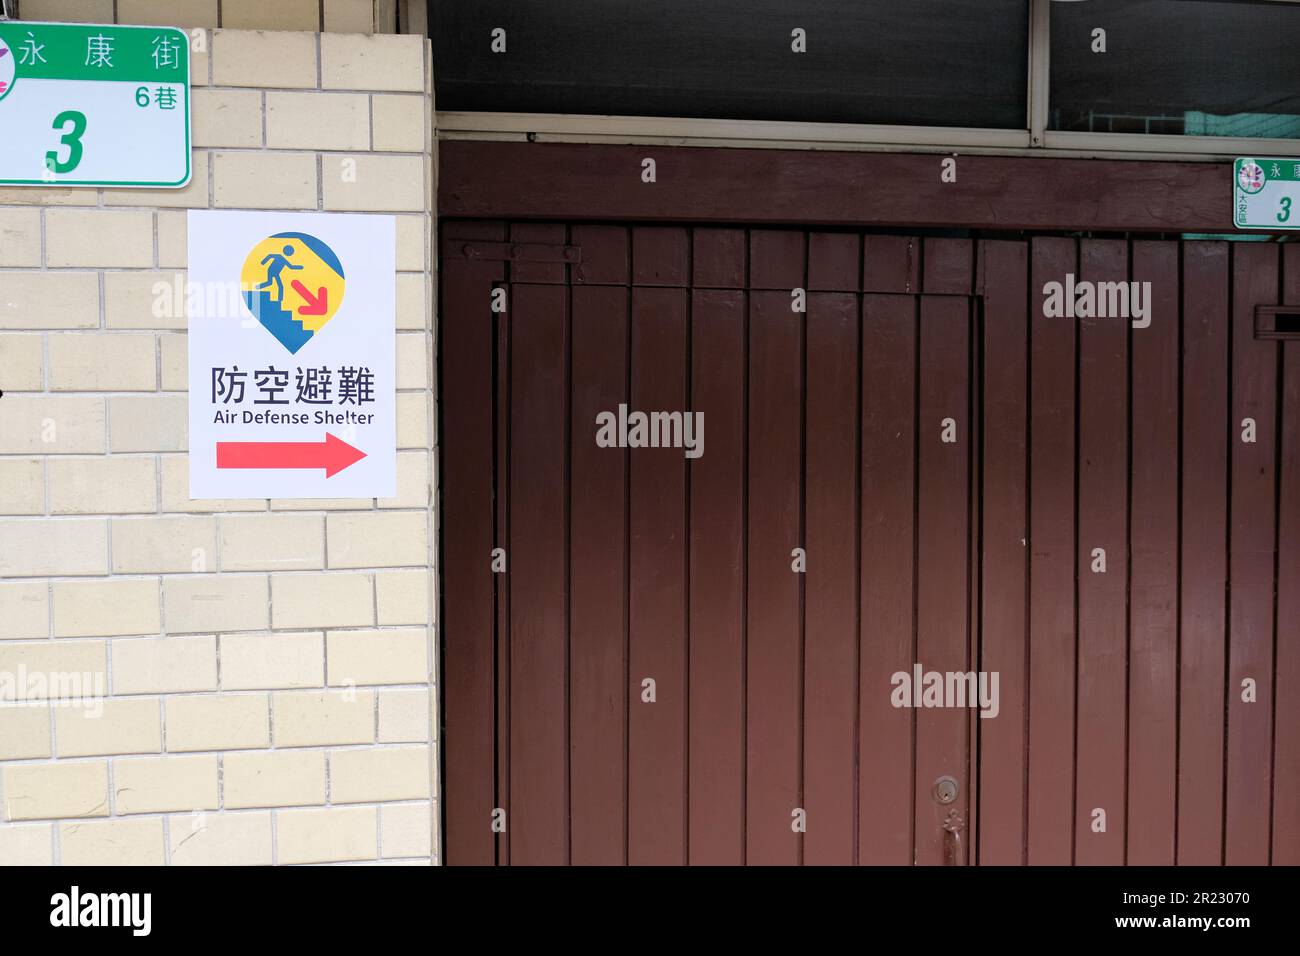 Air Defense Shelter sign in public spaces directing civilians to shelters for protection and safety in case of invading attacks; Taipei, Taiwan. Stock Photo